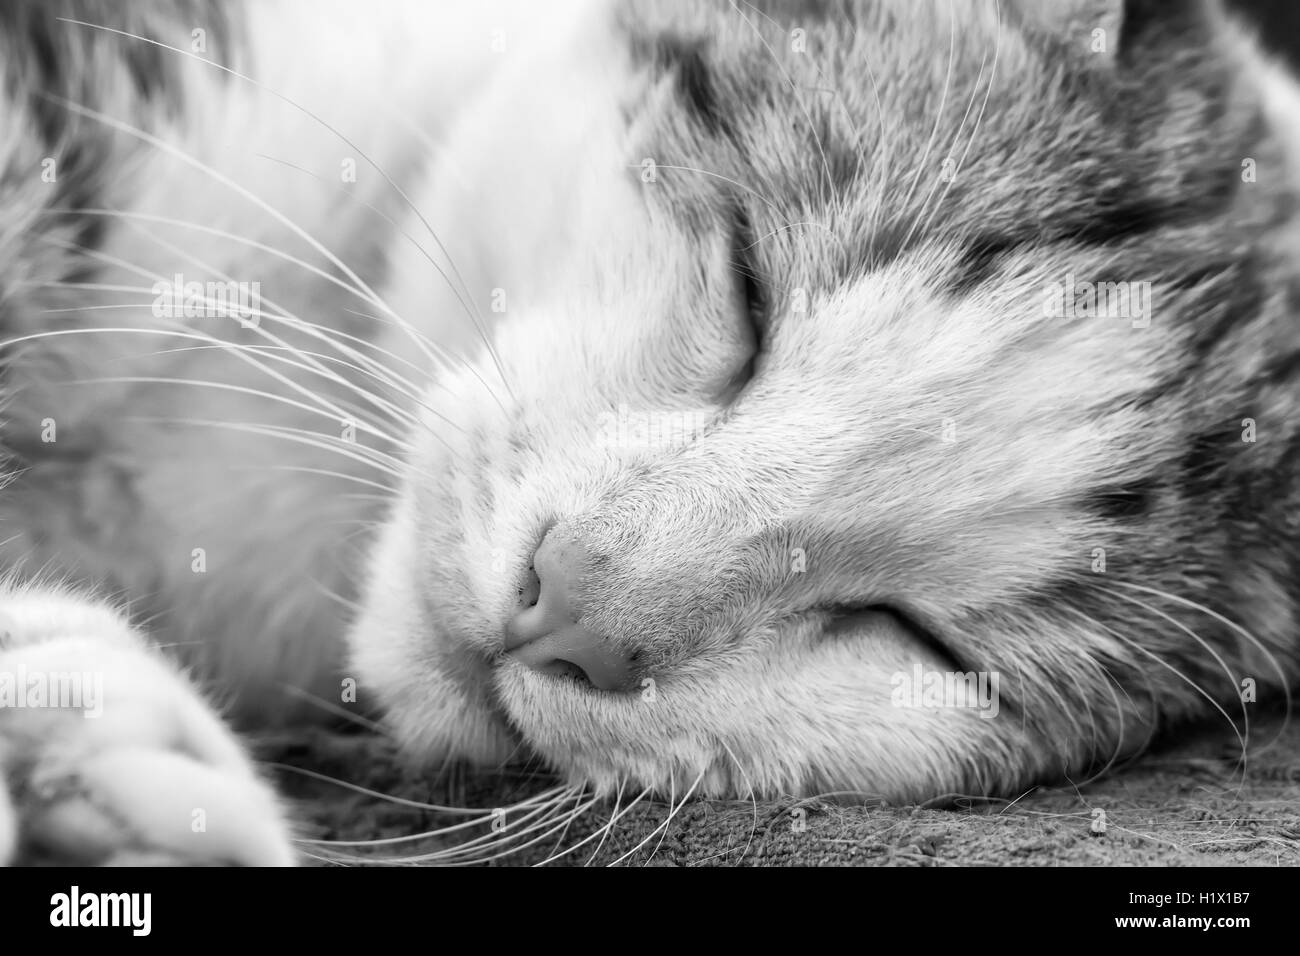 Young cat having an afternoon nap converted to black and white Stock Photo